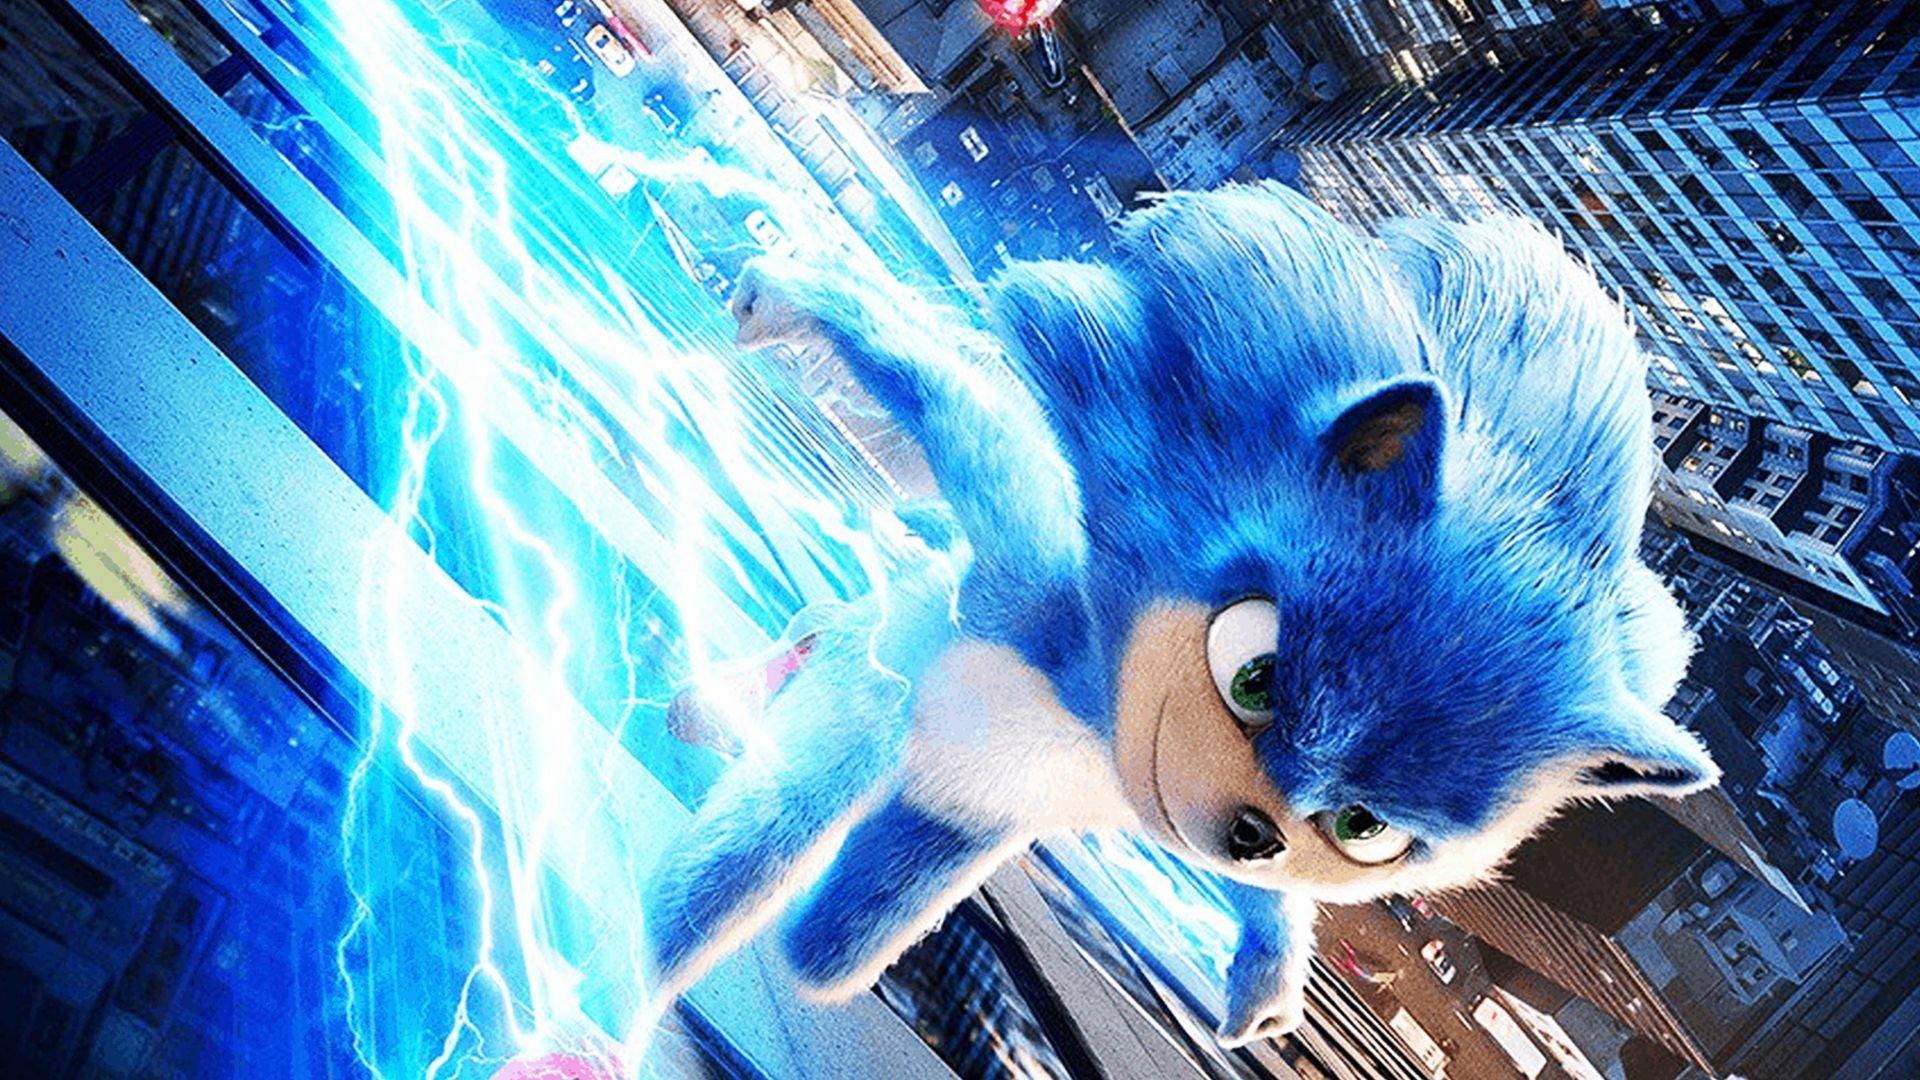 Rumour: Is This the Sonic the Hedgehog Movie's New Design